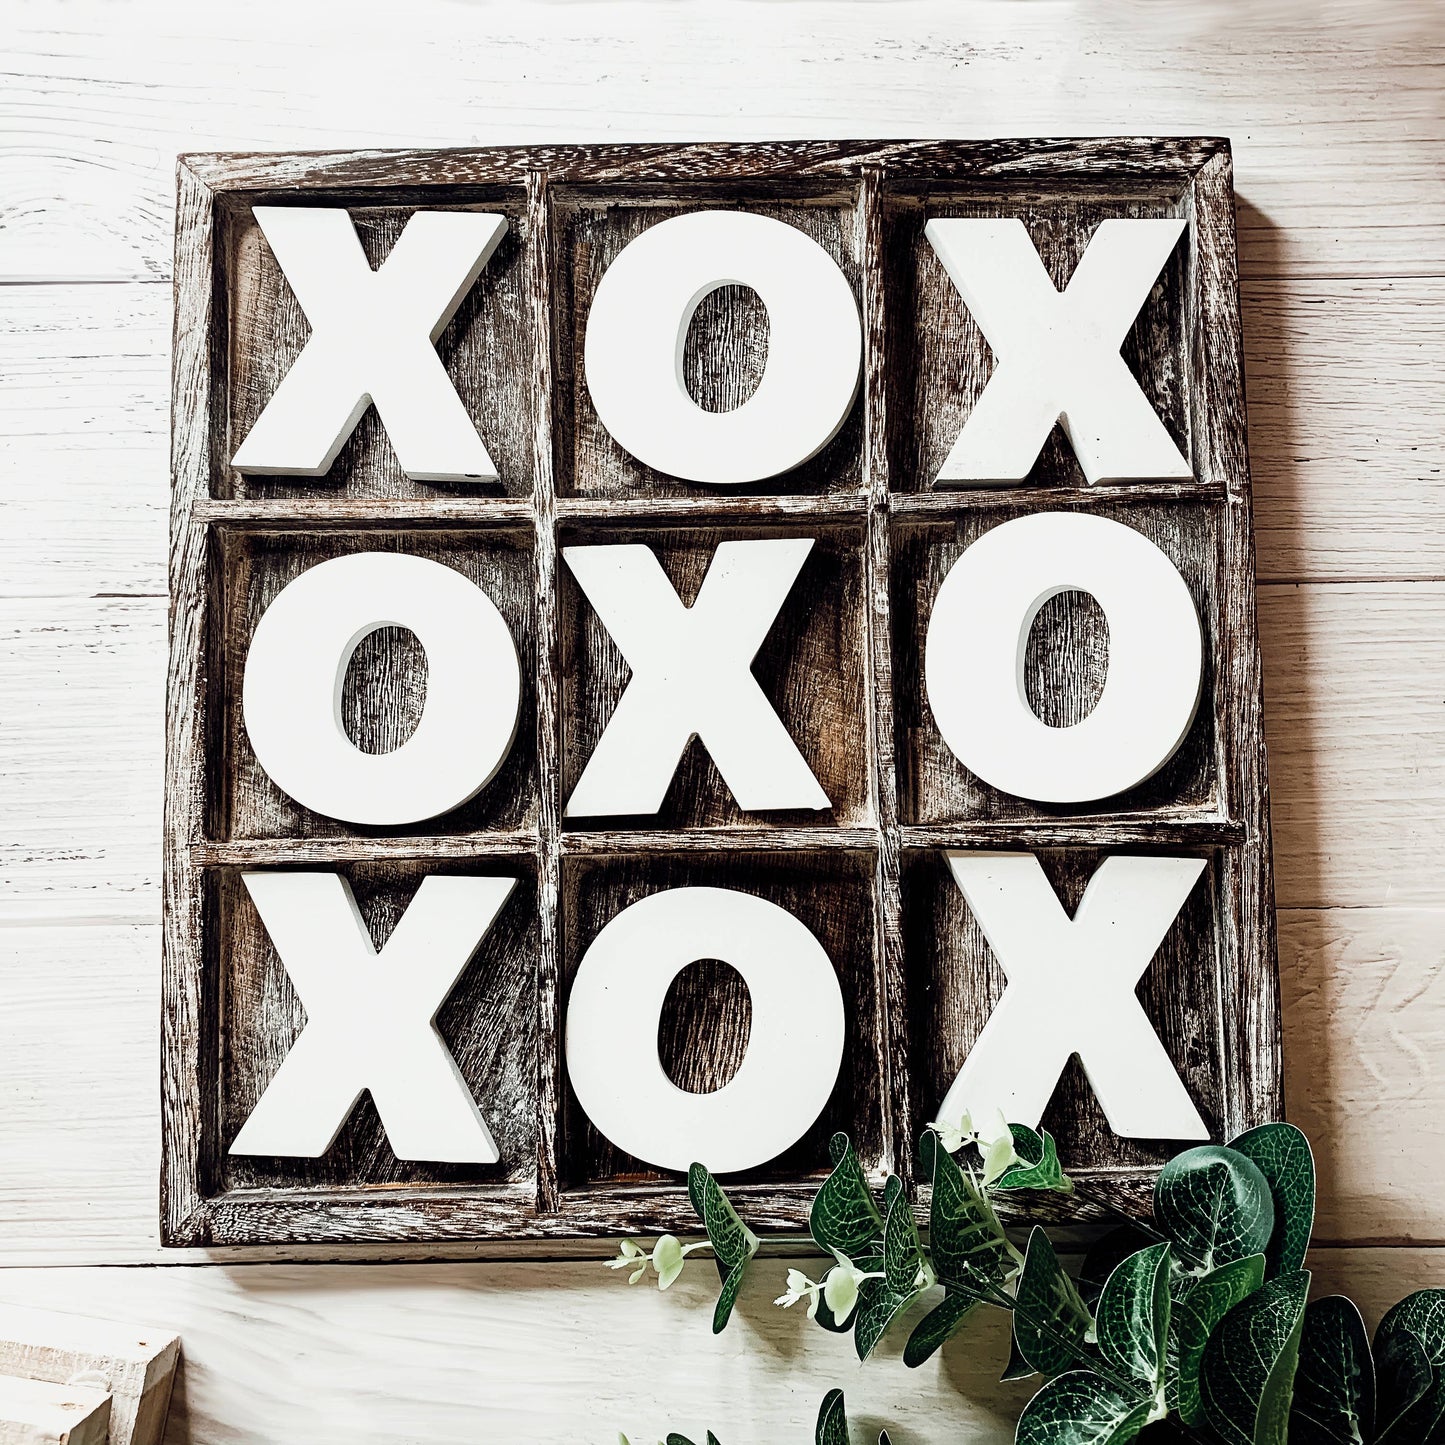 Wooden Tabletop Game + Decor, Tic Tac Toe Wood Game